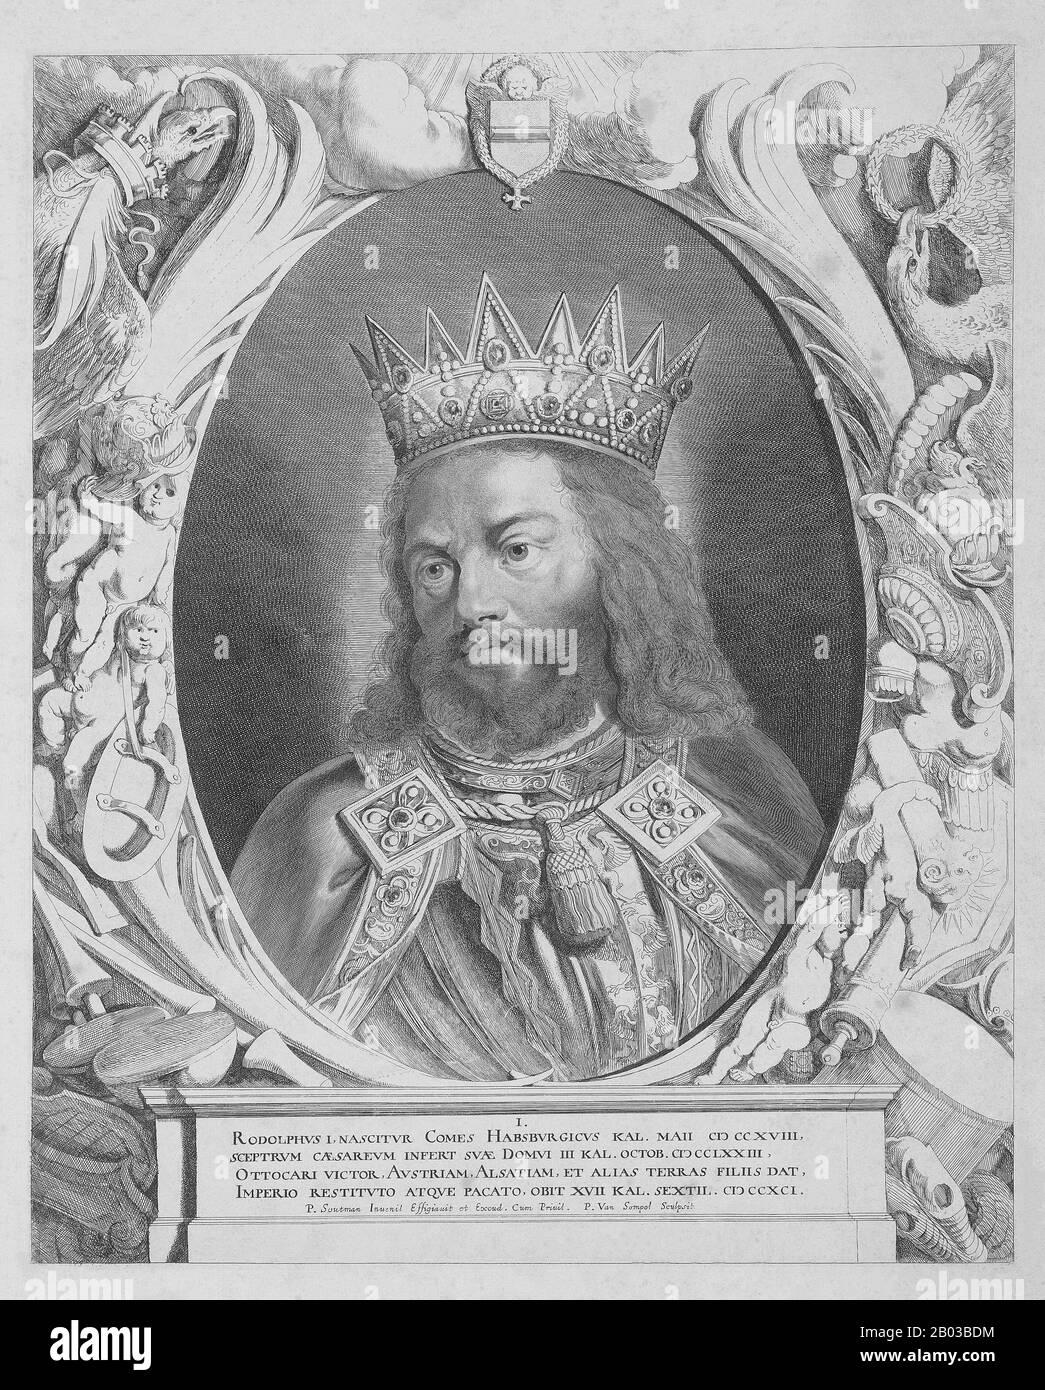 Rudolf I (1218-1291), also known as Rudolf of Habsburg, was the son of Count Albert IV of Habsburg, and became count after his father's death in 1239. His godfather was Emperor Frederick II, to whom he paid frequent court visits. Rudolf ended the Great Interregnum that had engulfed the Holy Roman Empire after the death of Frederick when he was elected as King of Germany in 1273. Stock Photo